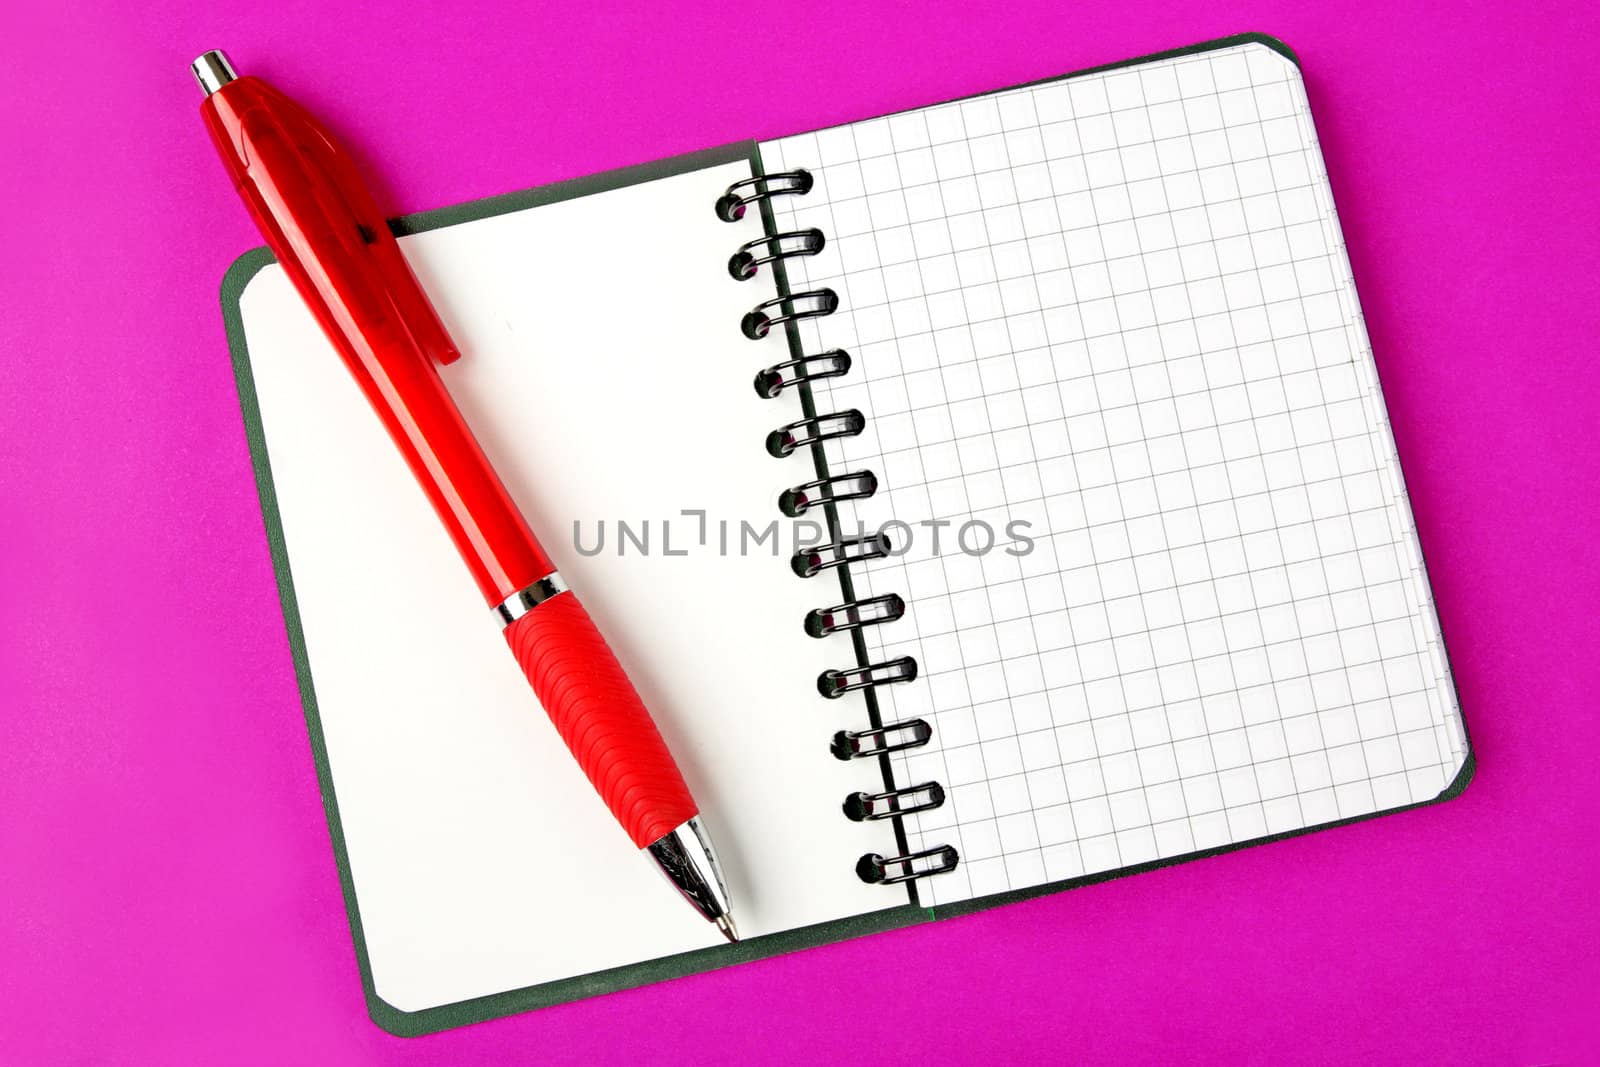 Opened notebook squared pagewith red pen over it on purple background 